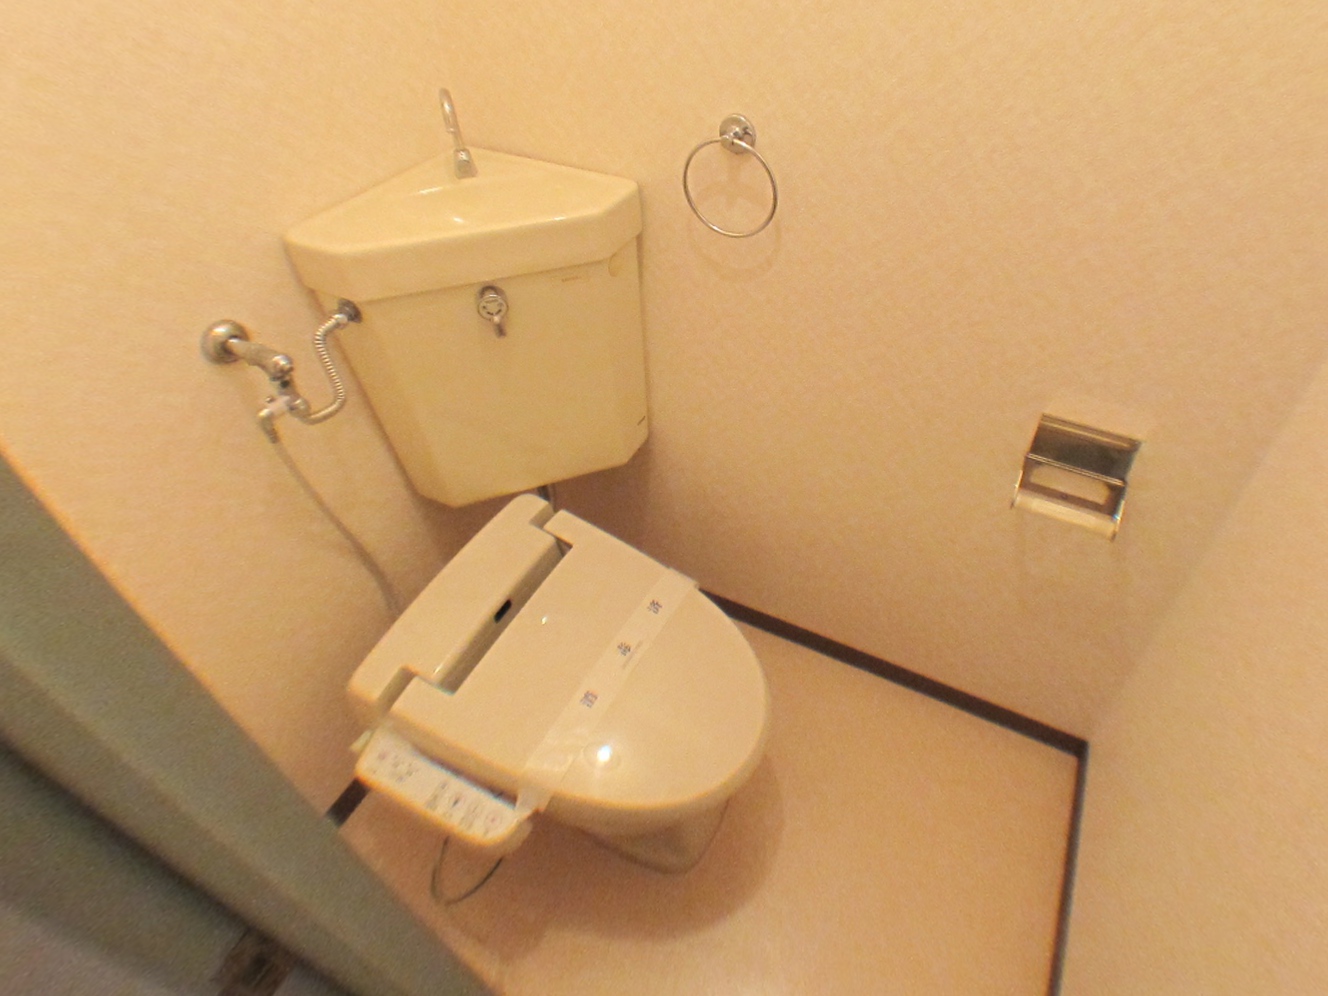 Toilet. It is a photograph of another in Room